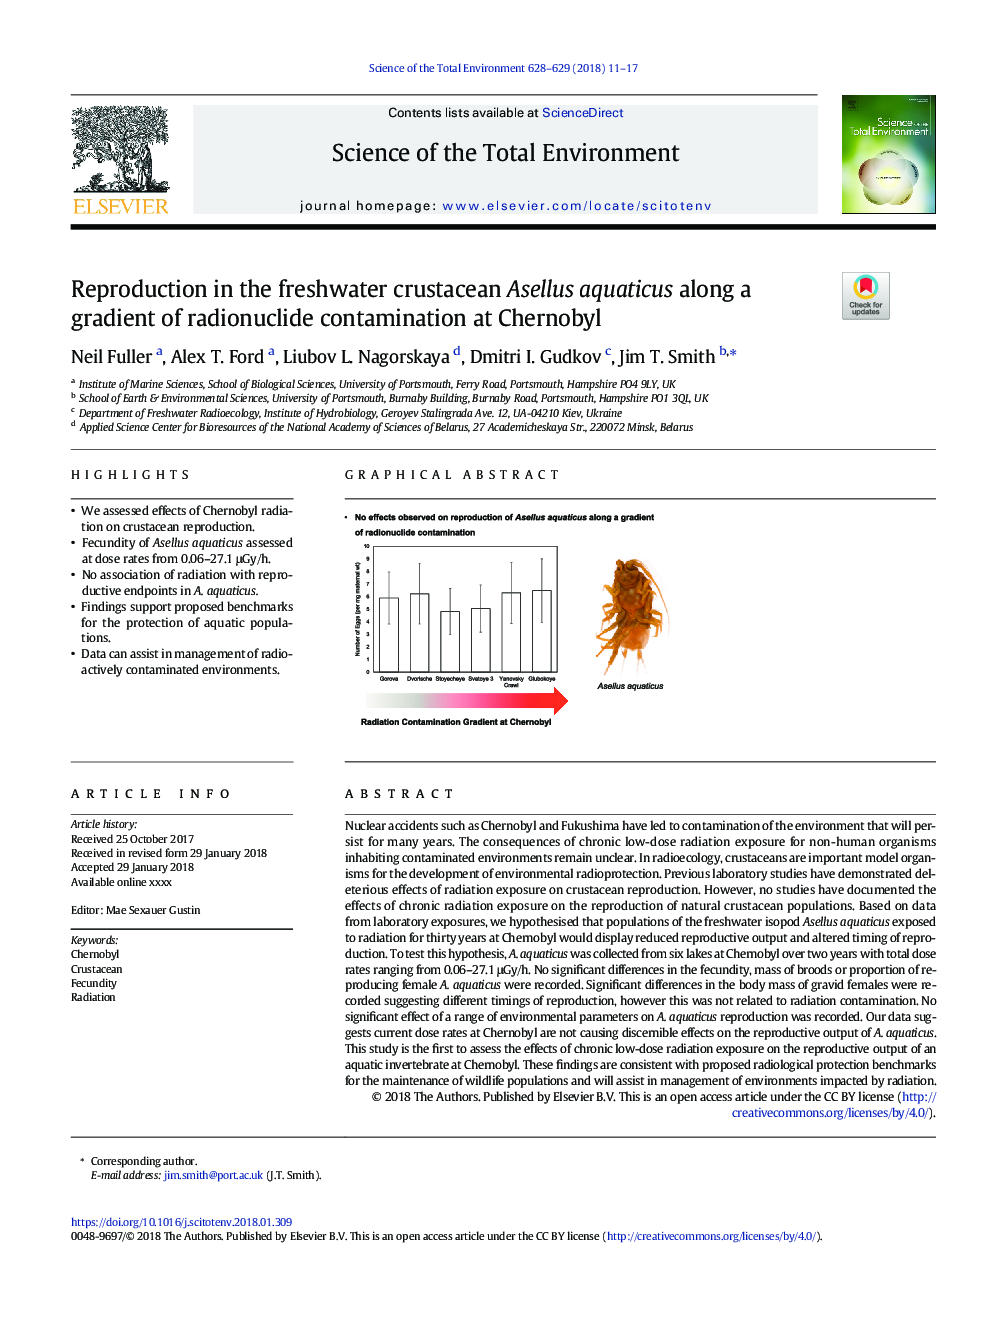 Reproduction in the freshwater crustacean Asellus aquaticus along a gradient of radionuclide contamination at Chernobyl